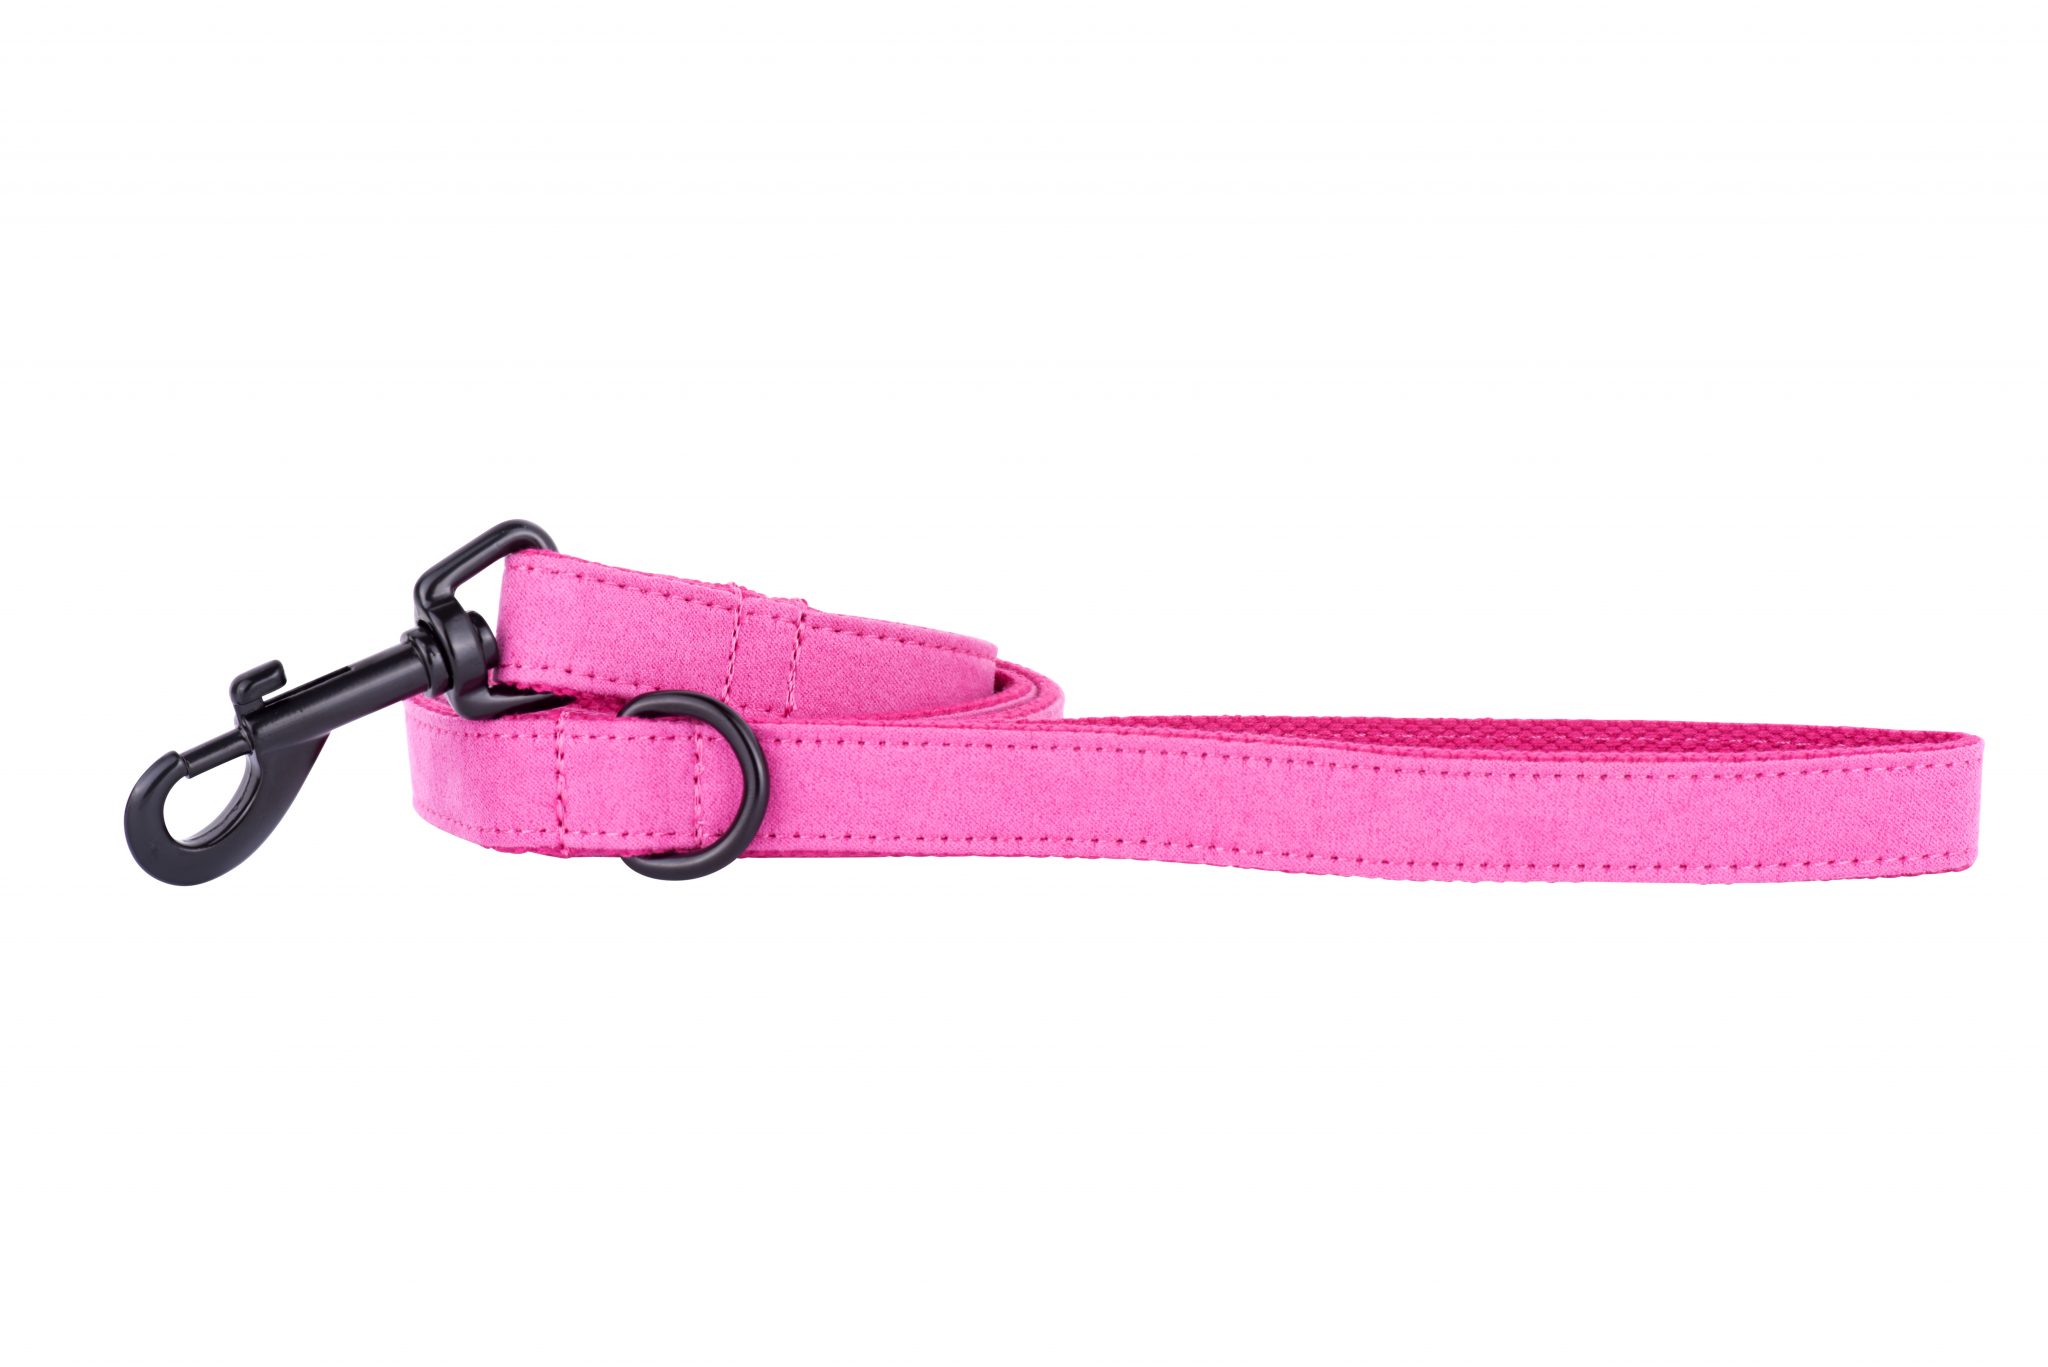 PINK designer dog lead by IWOOF with black fittings